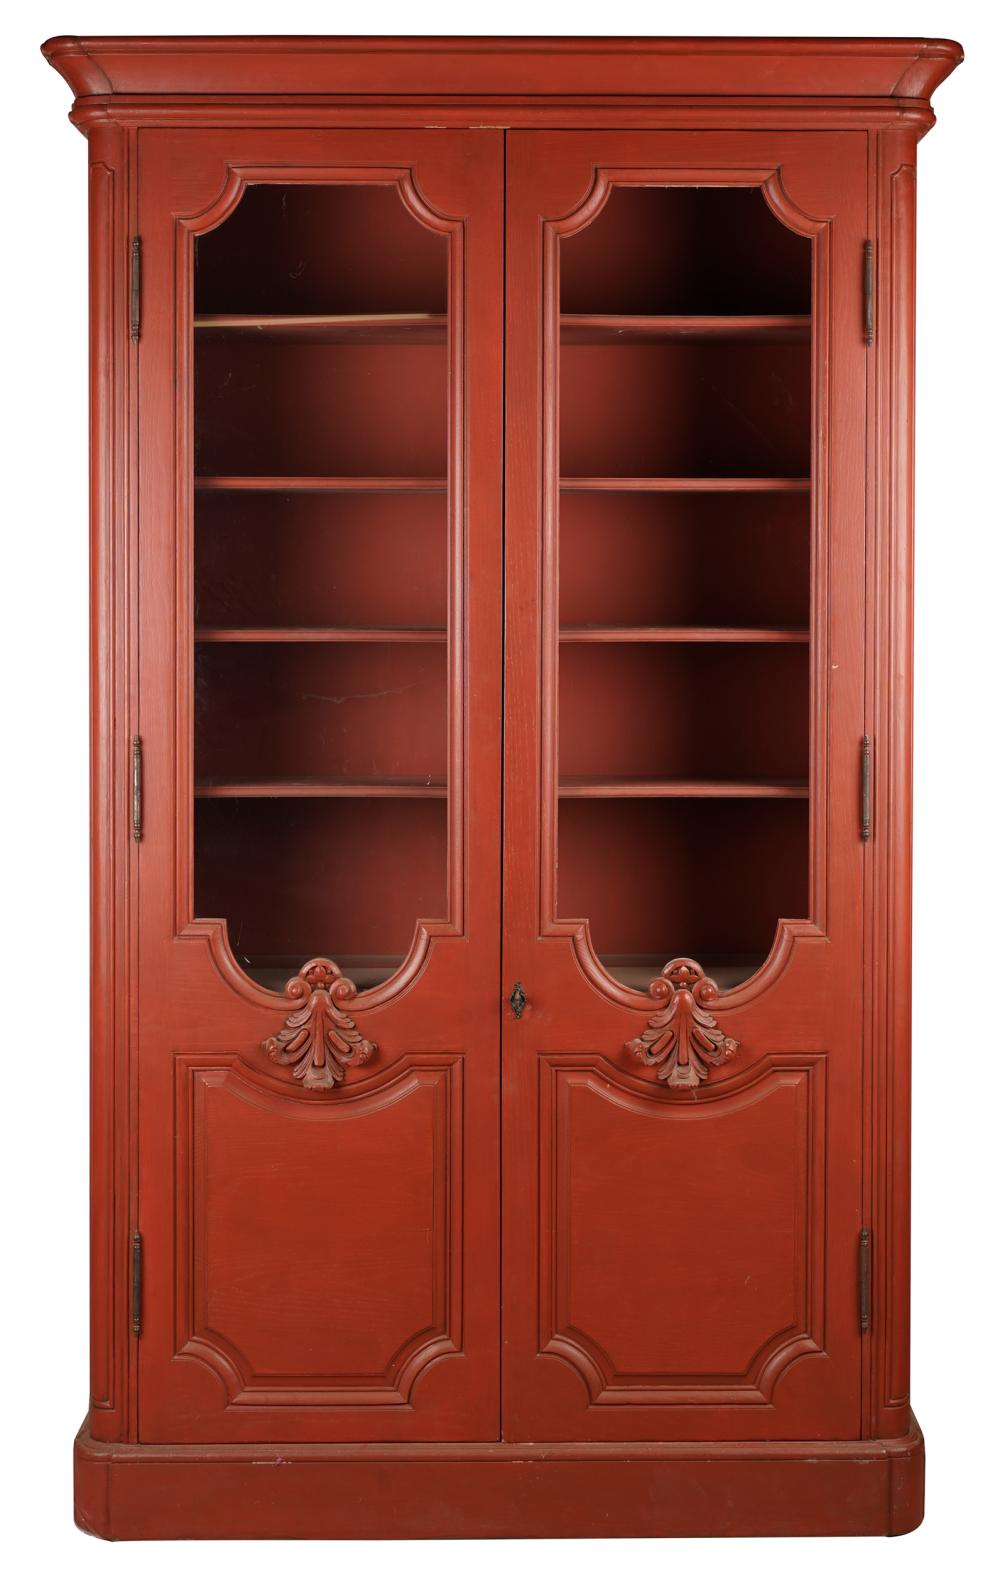 FRENCH PROVINCIAL STYLE RED PAINTED 330571